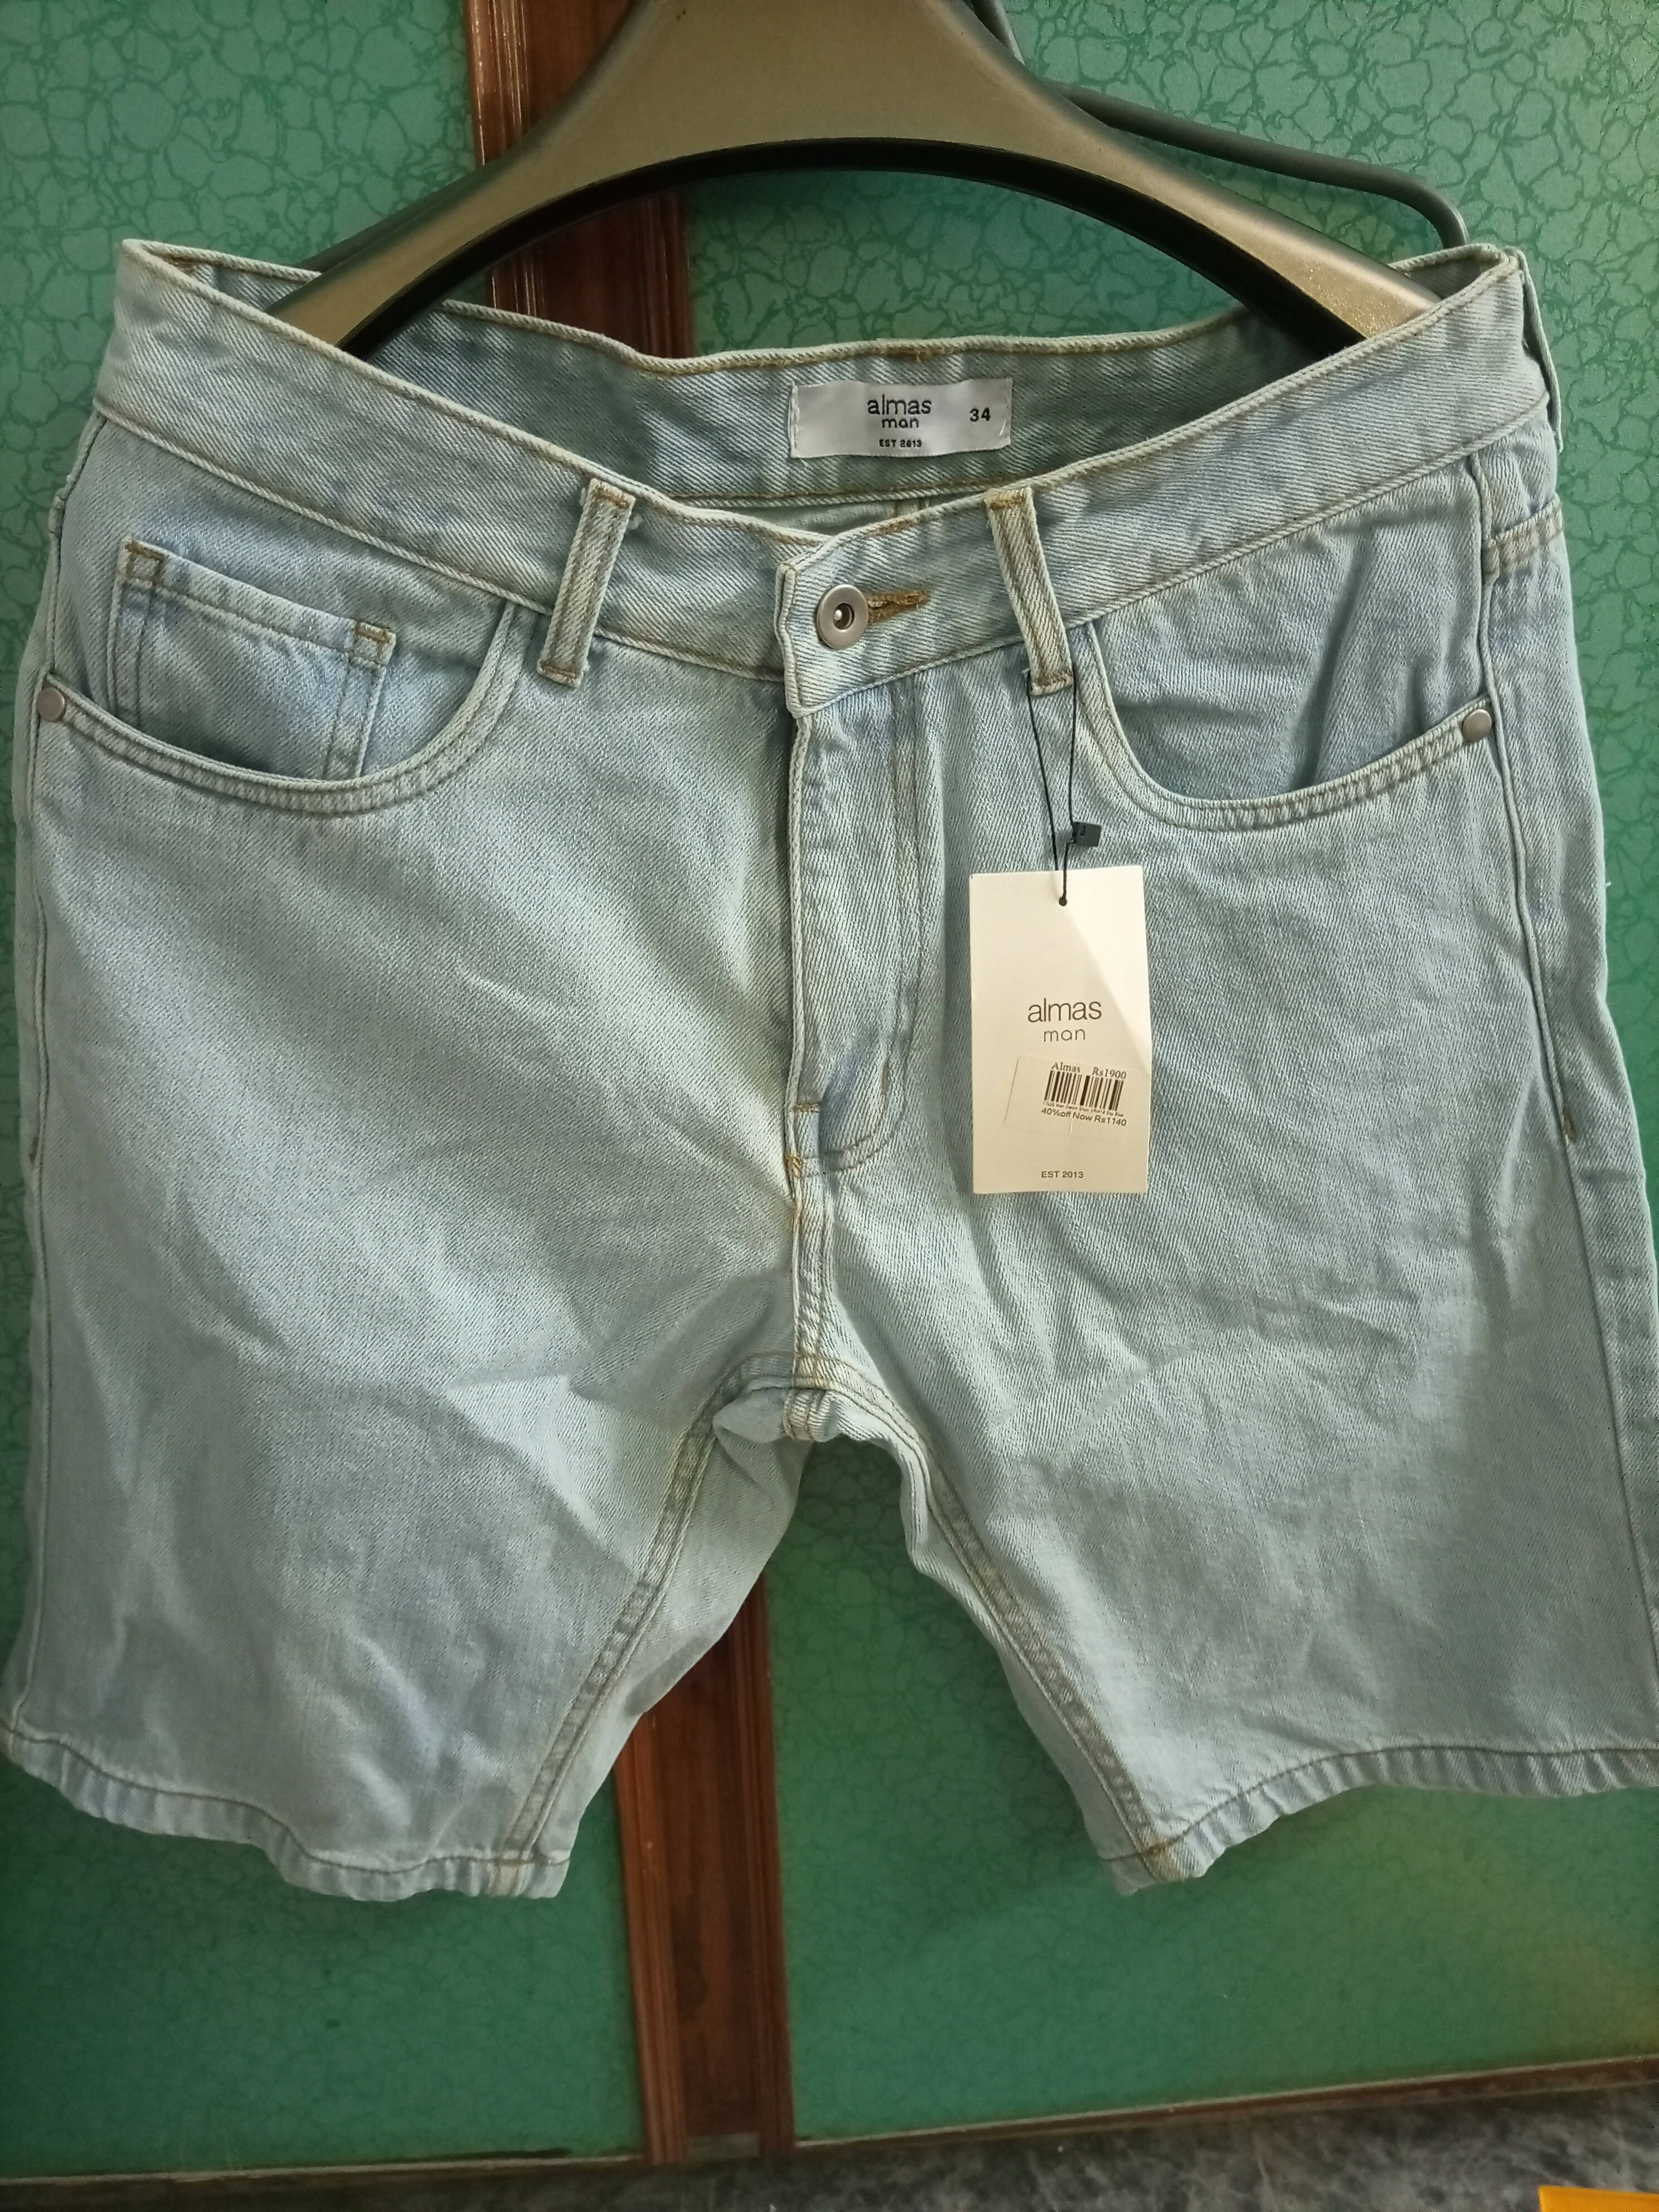 Almas | Men Jeans & Bottoms | Brand new with tags